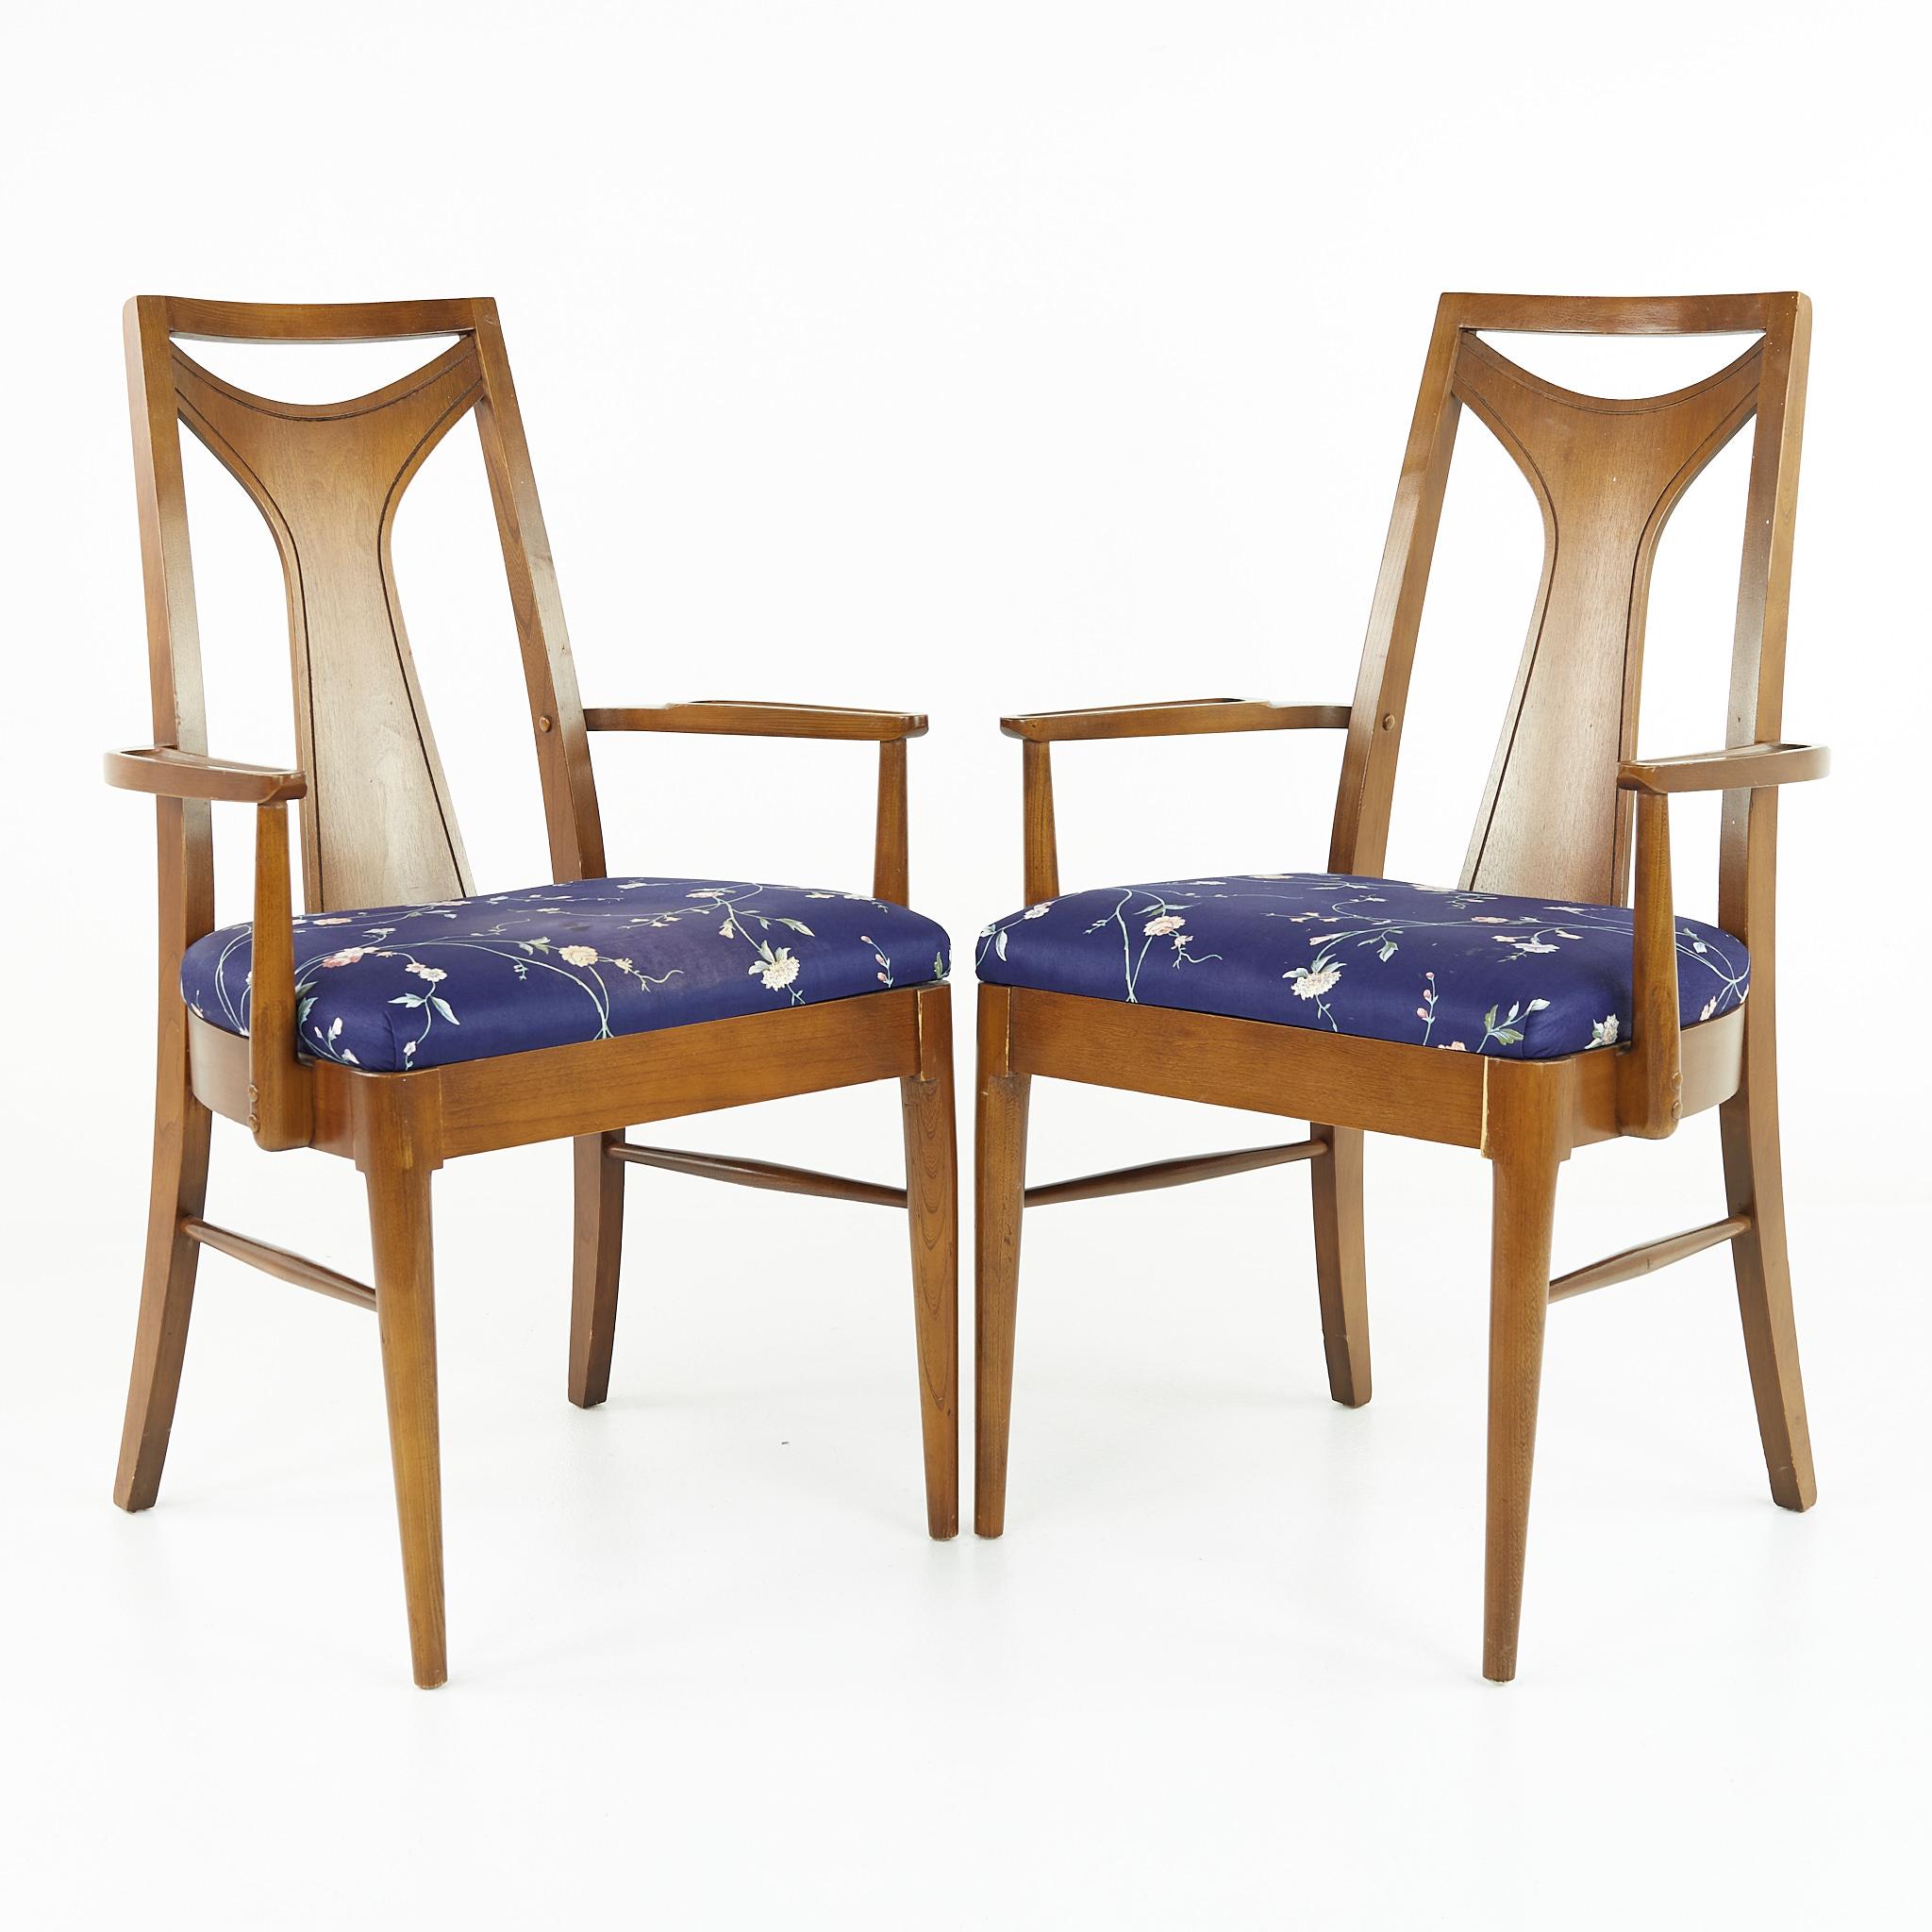 Kent Coffey Perspecta Mid Century Walnut Dining Chairs, Set of 6 In Good Condition For Sale In Countryside, IL